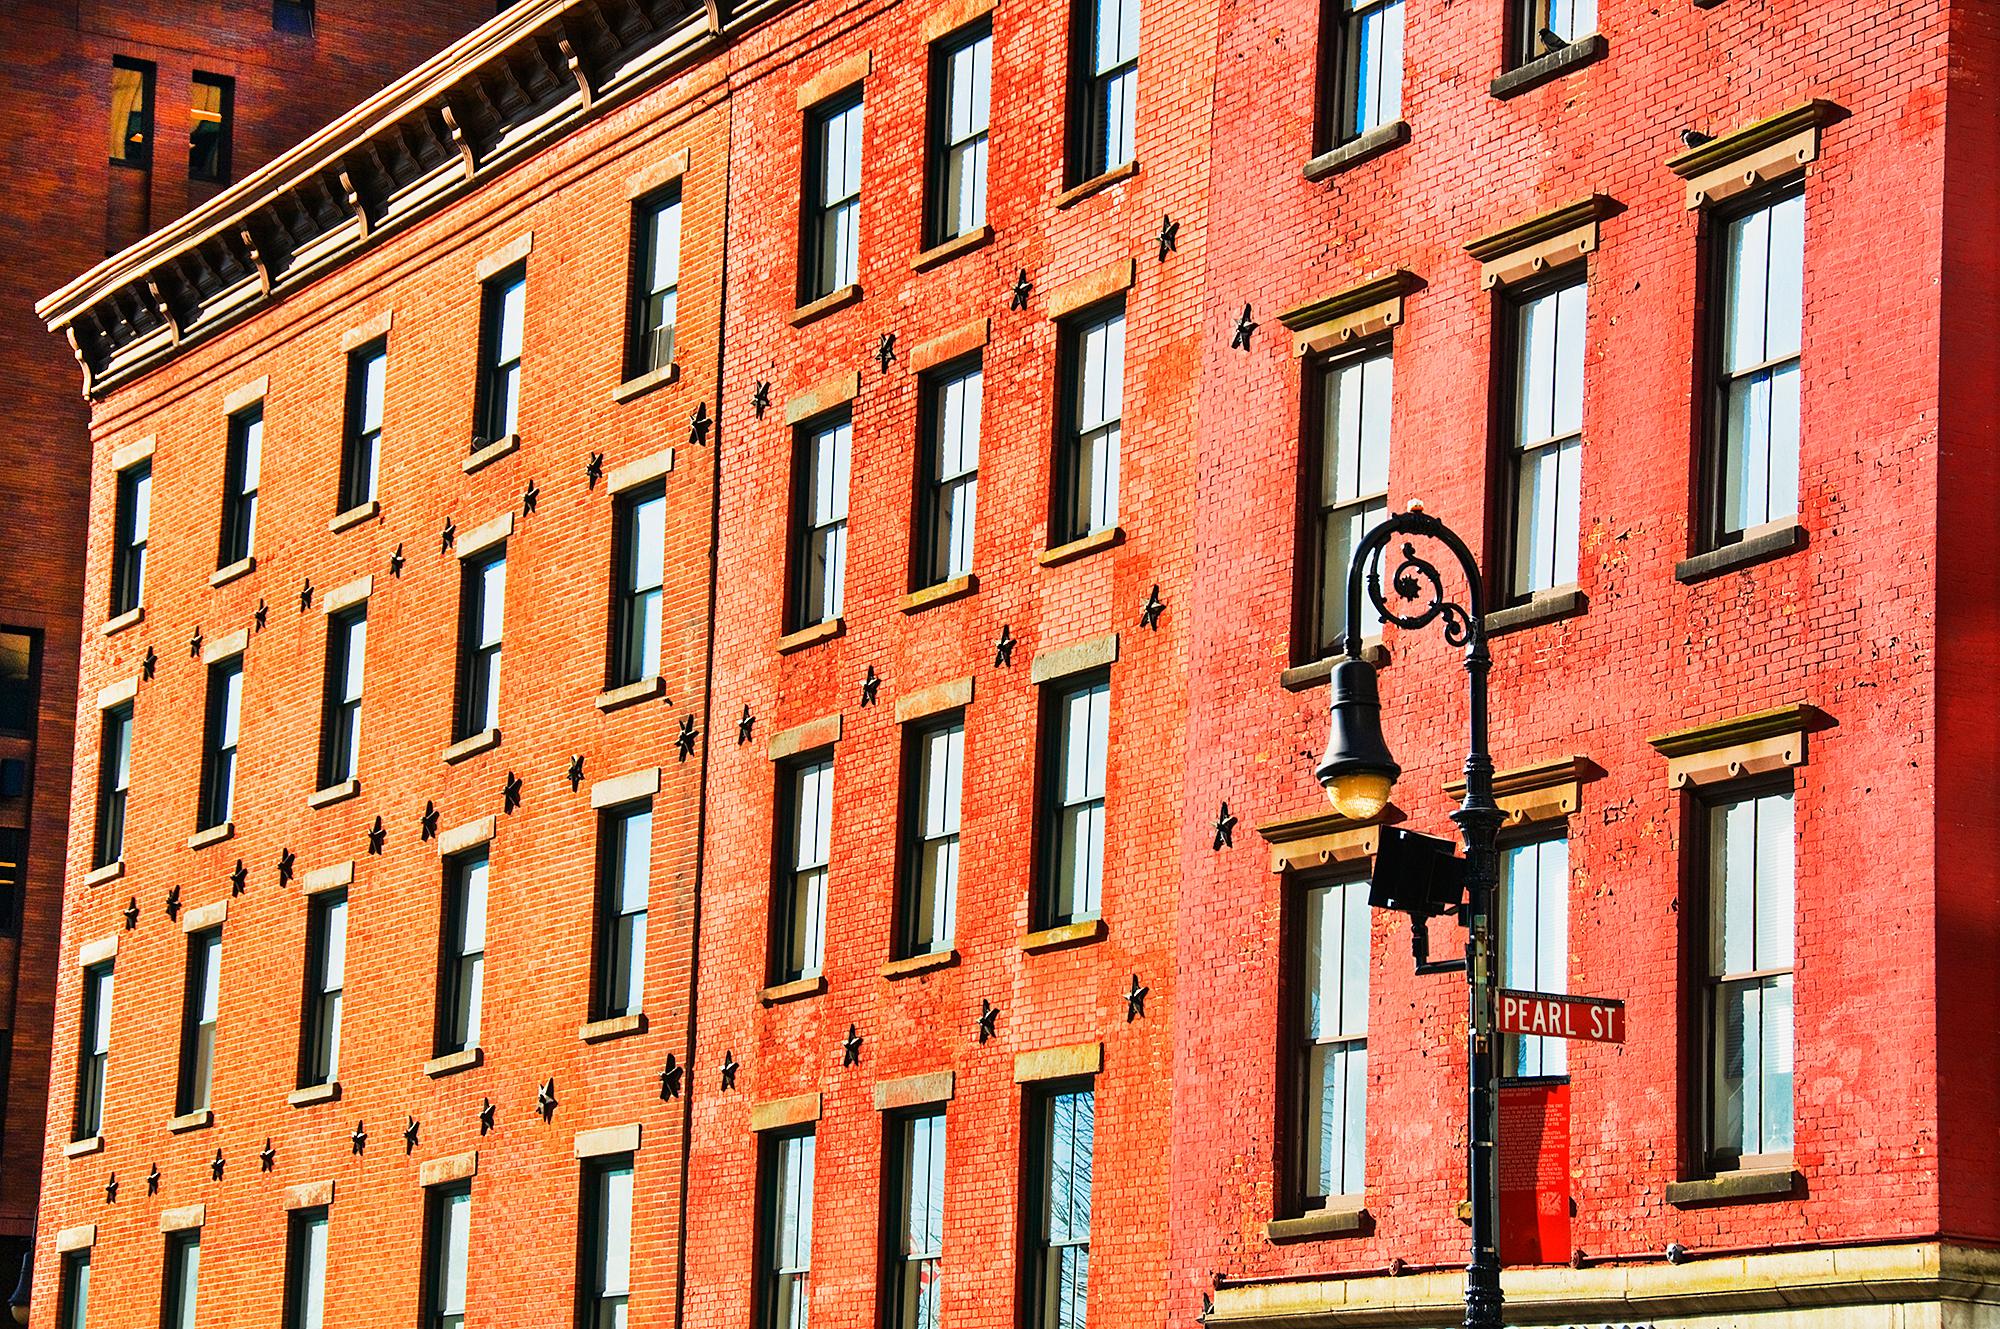 Red Brick Building Facade Street Scene in New York City by Mitchell Funk